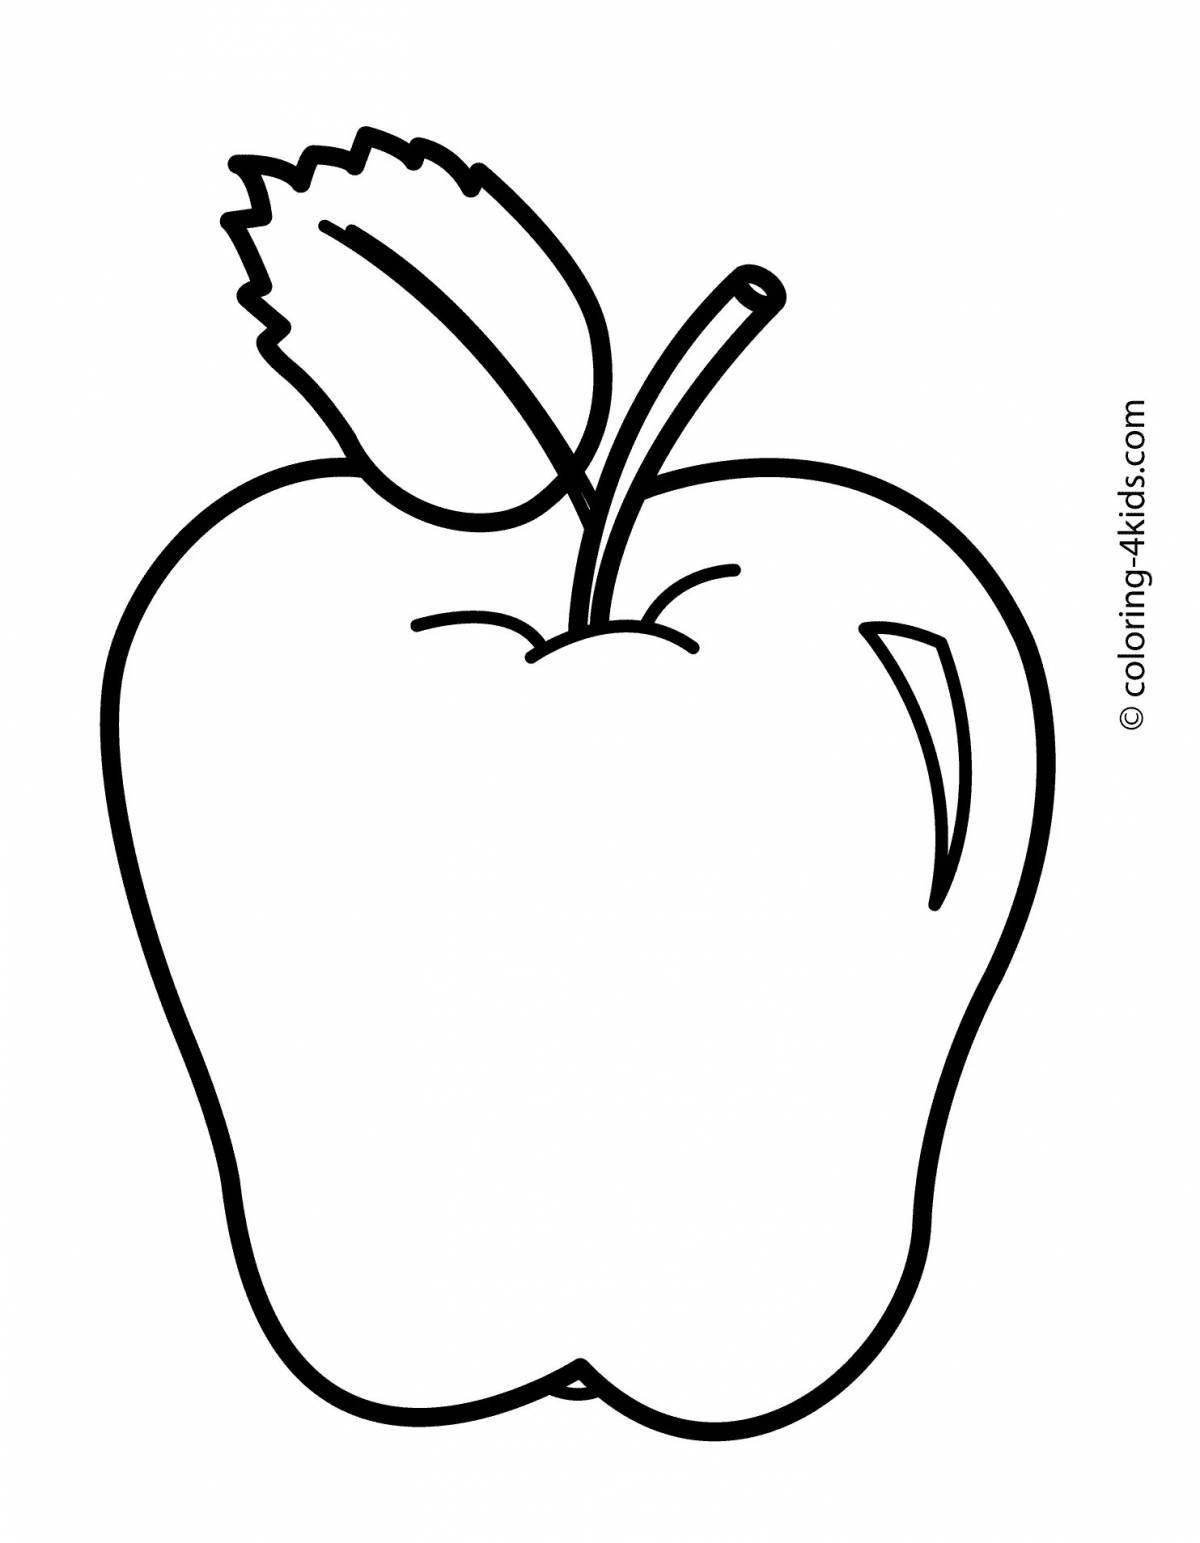 Creative apple coloring book for 4-5 year olds